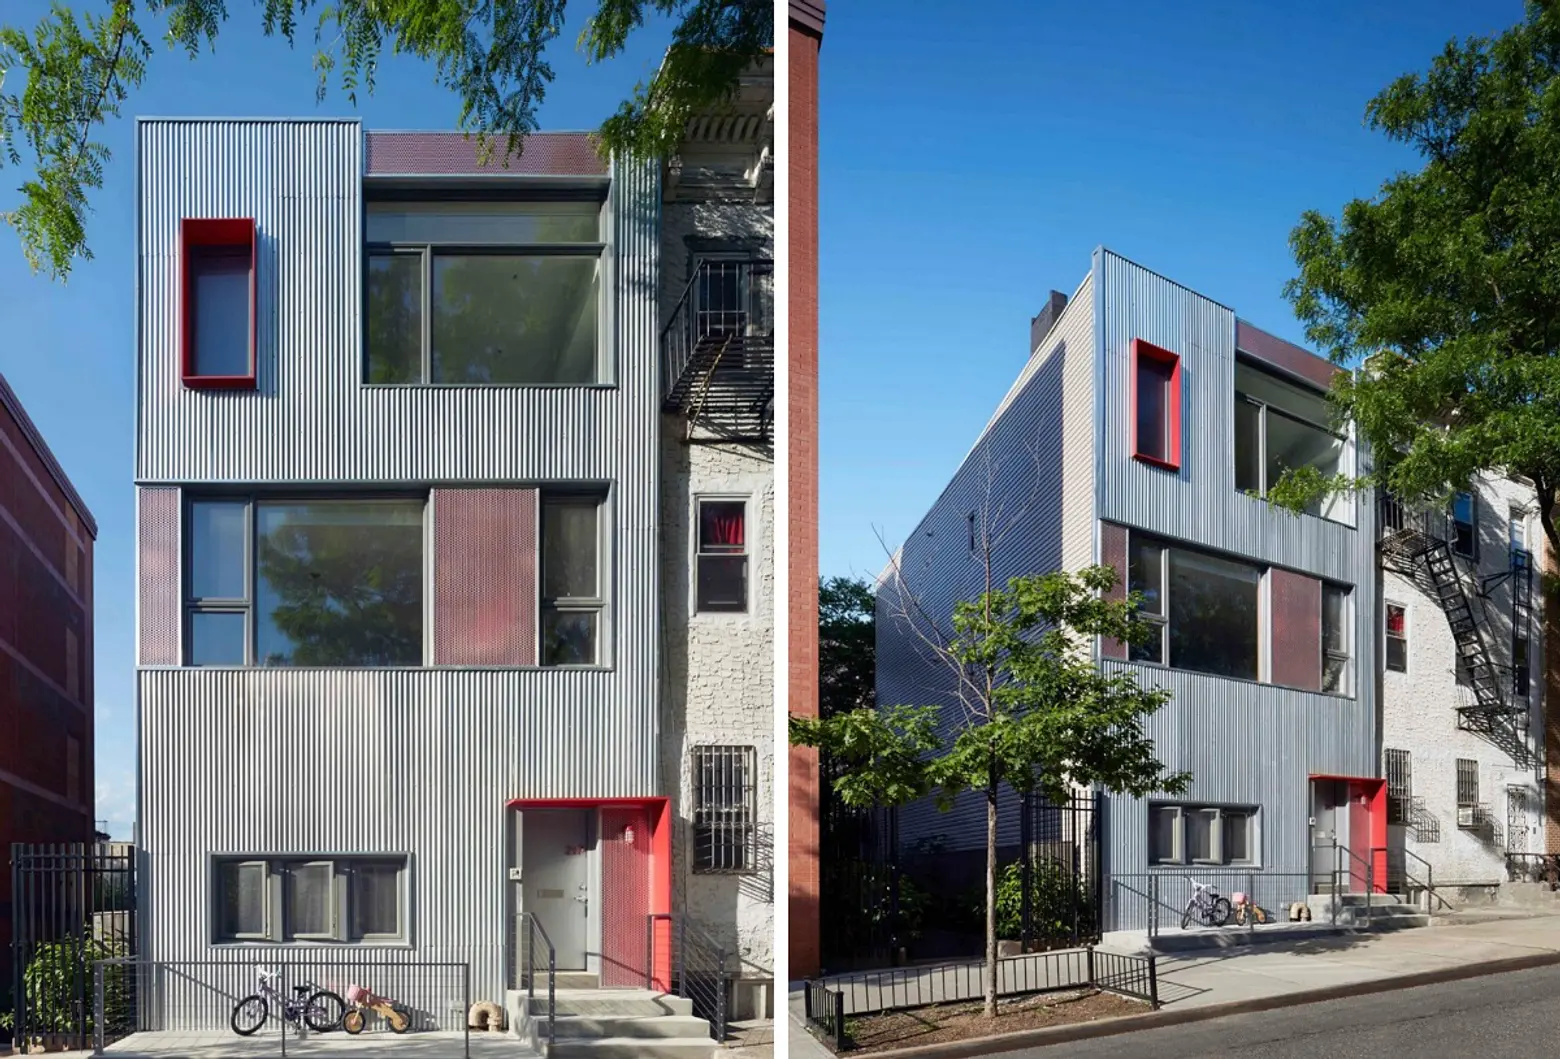 Park Slope Townhouse by Etelamaki Architecture Uses a Nondescript Facade to Stand Out